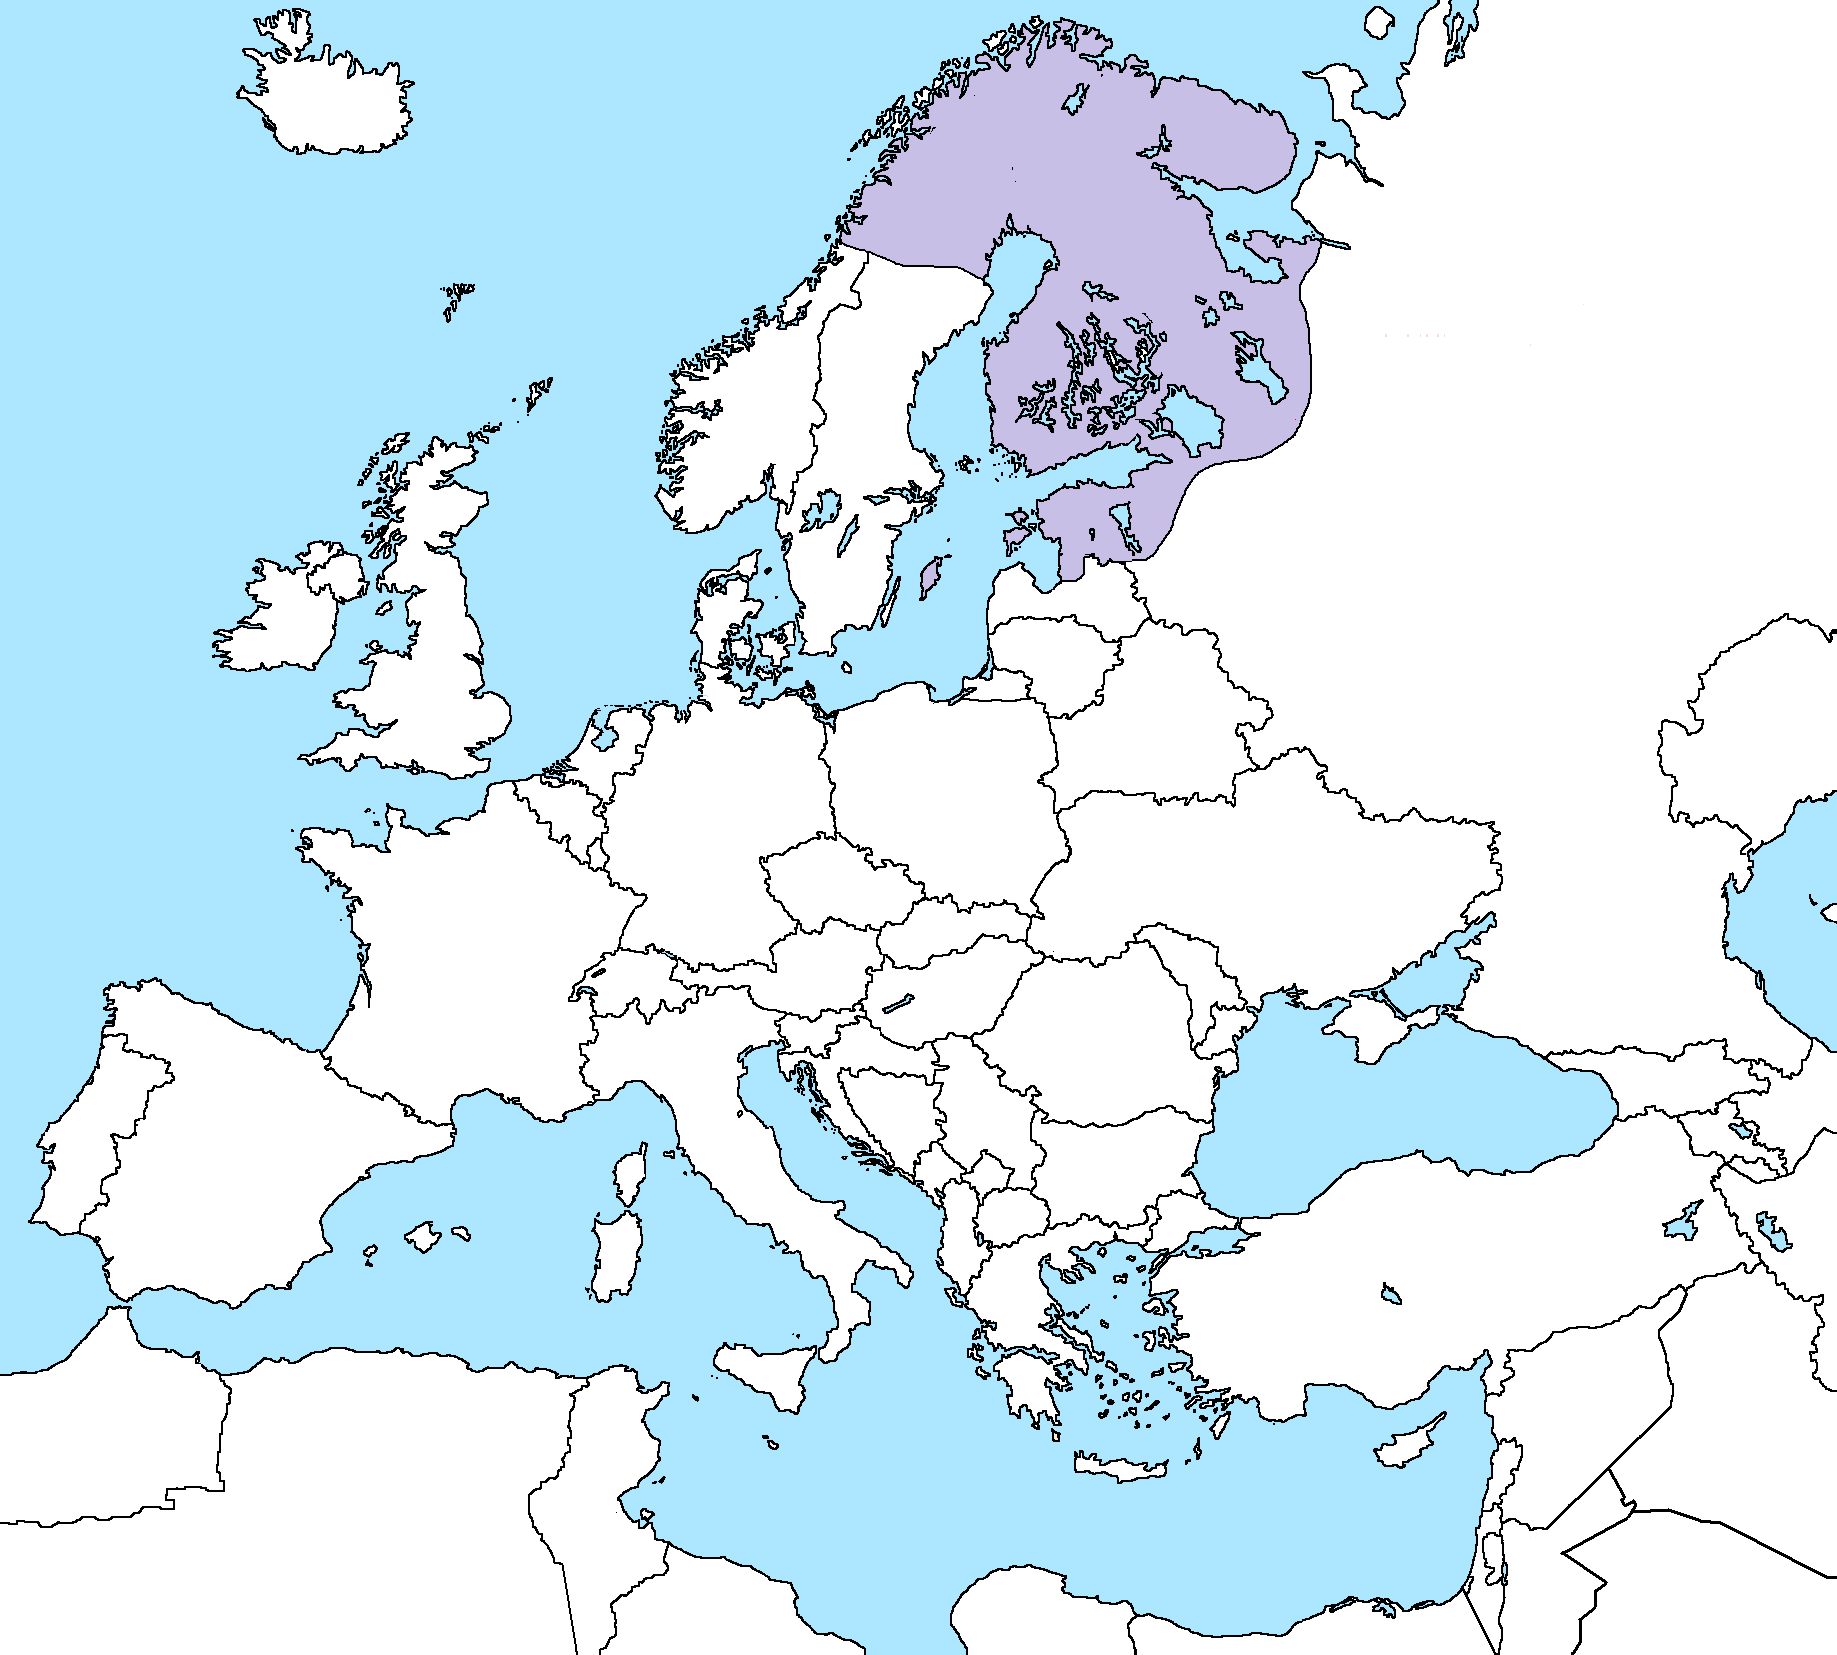 Greater Finland